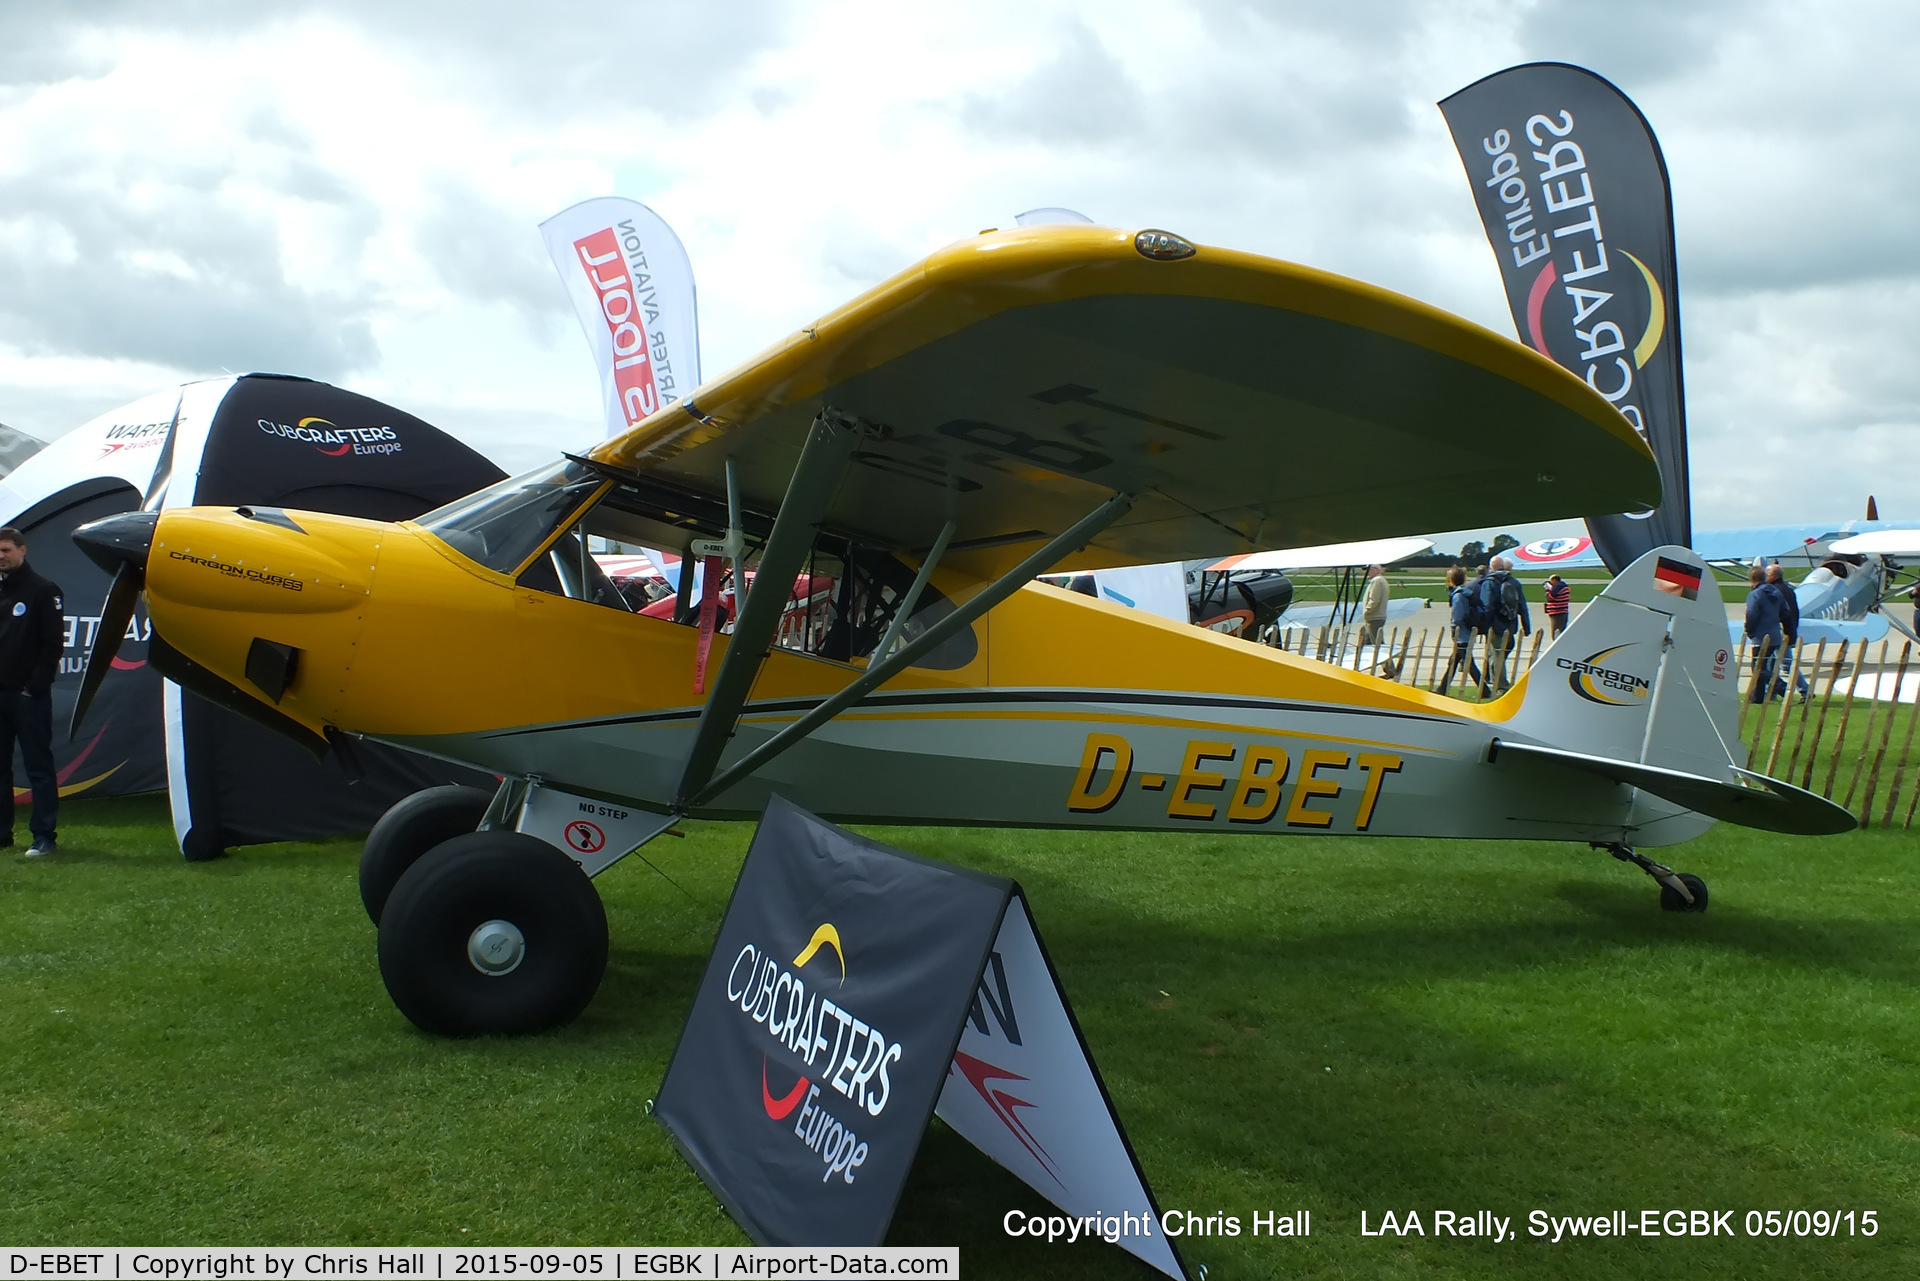 D-EBET, Cub Crafters CC11-160 Carbon Cub SS C/N CC11-00240, at the LAA Rally 2015, Sywell